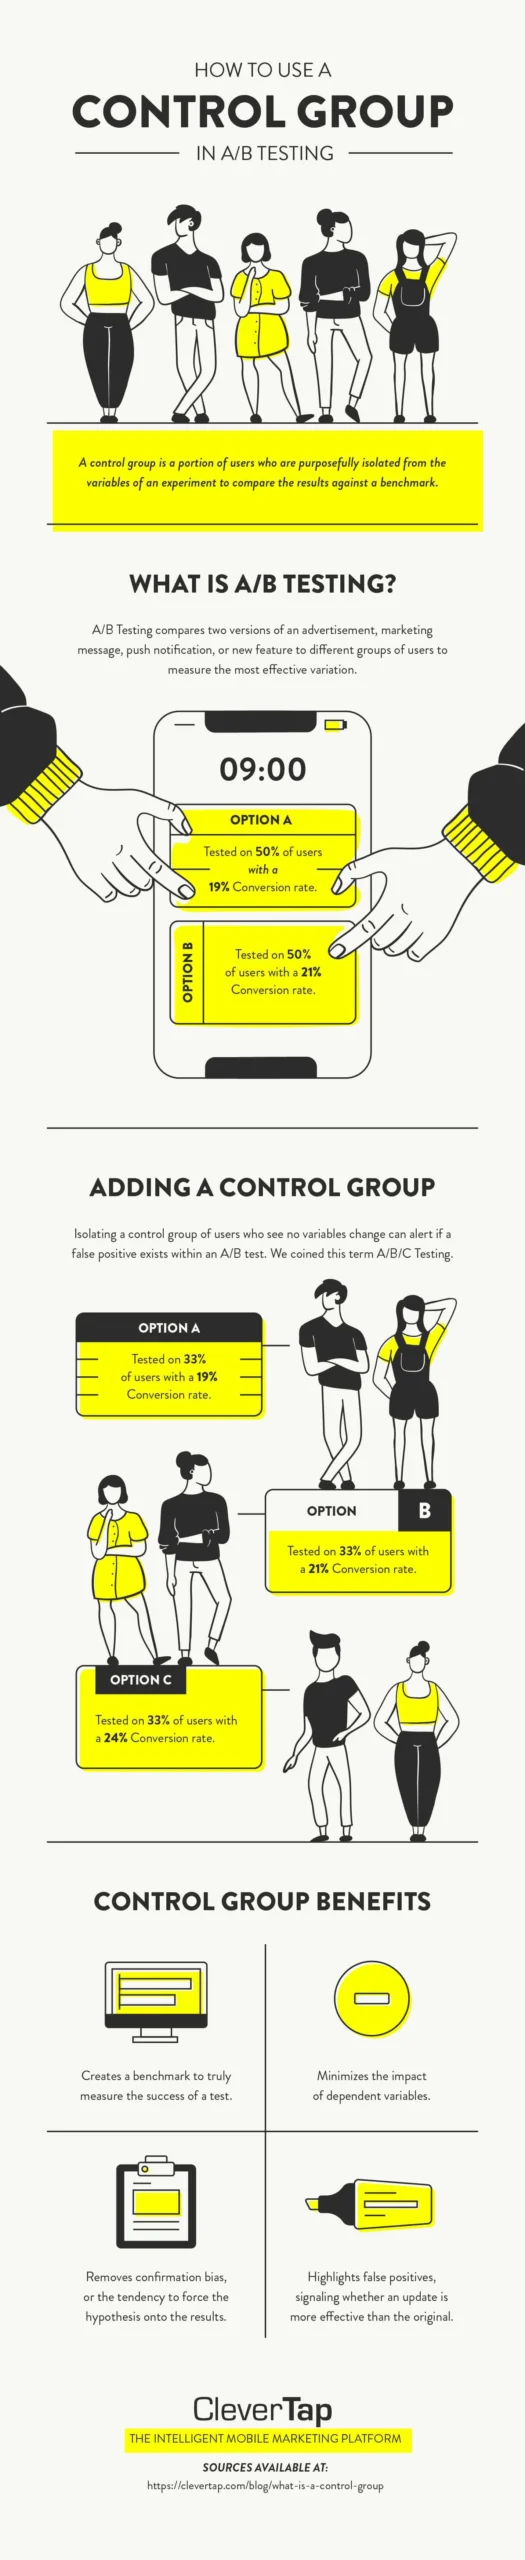 How To Use A Control Group In A/B Testing [InfoGraphic]